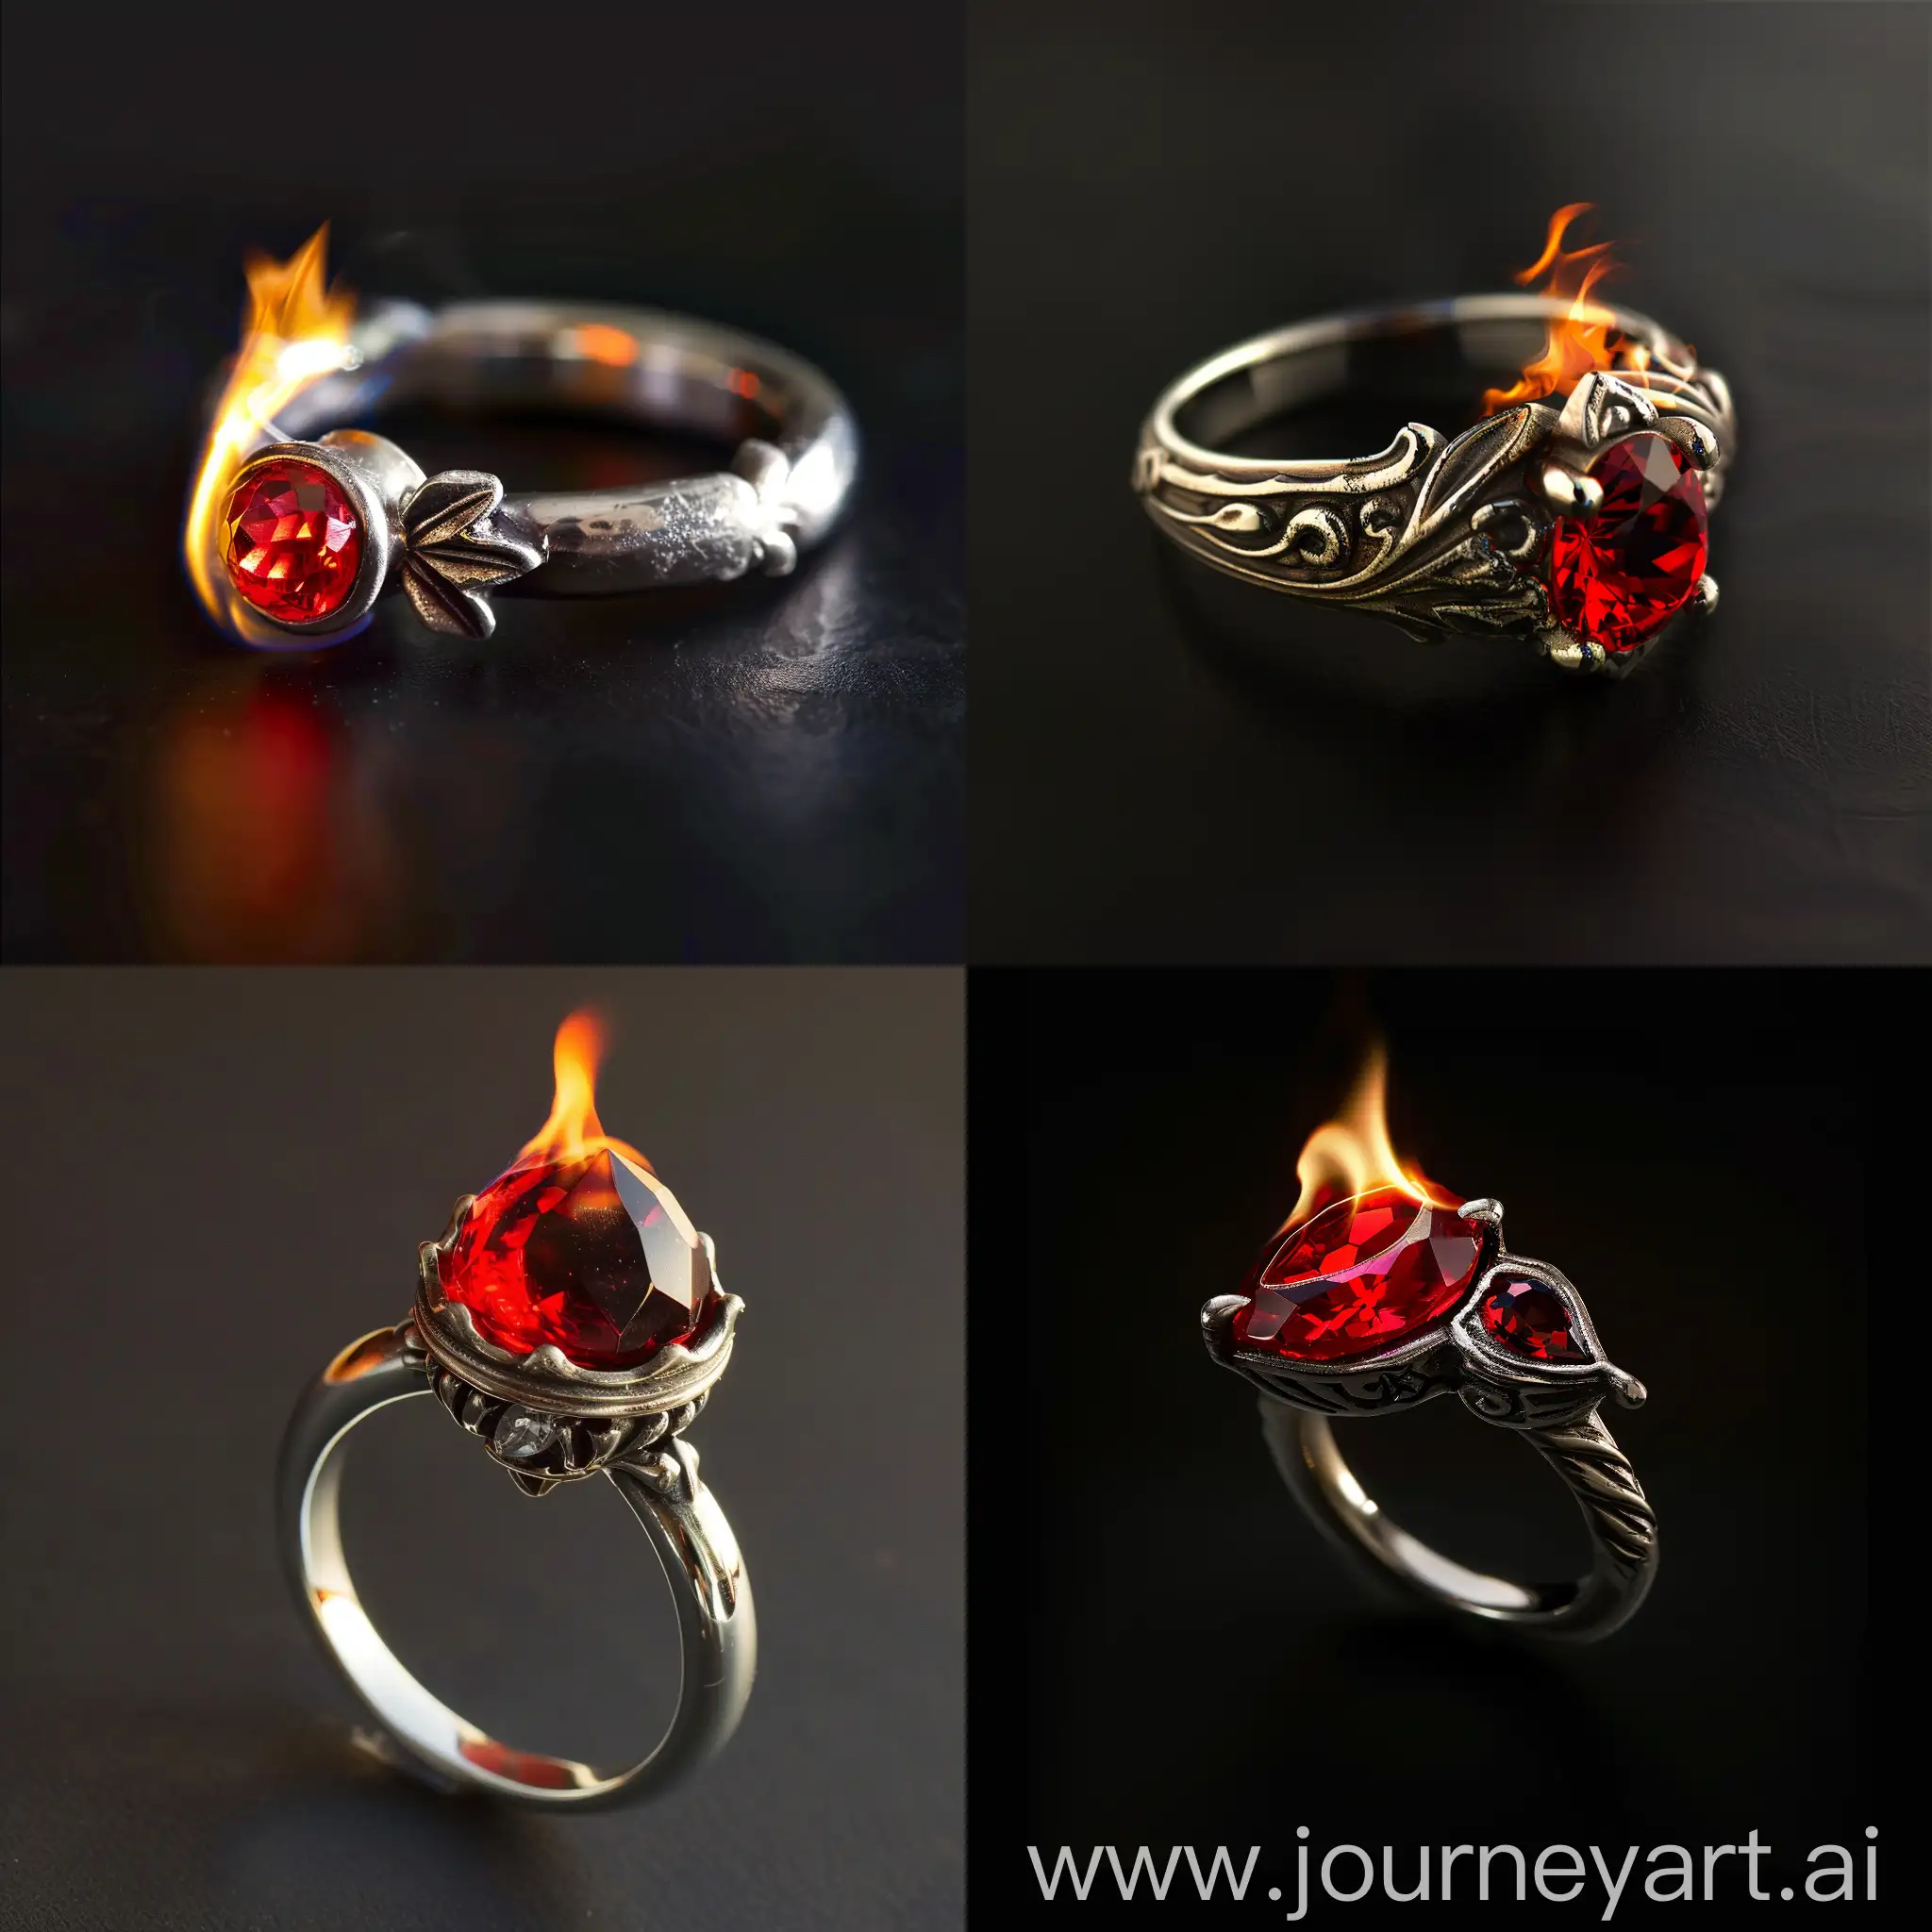 fire comes from a ring with a red stone